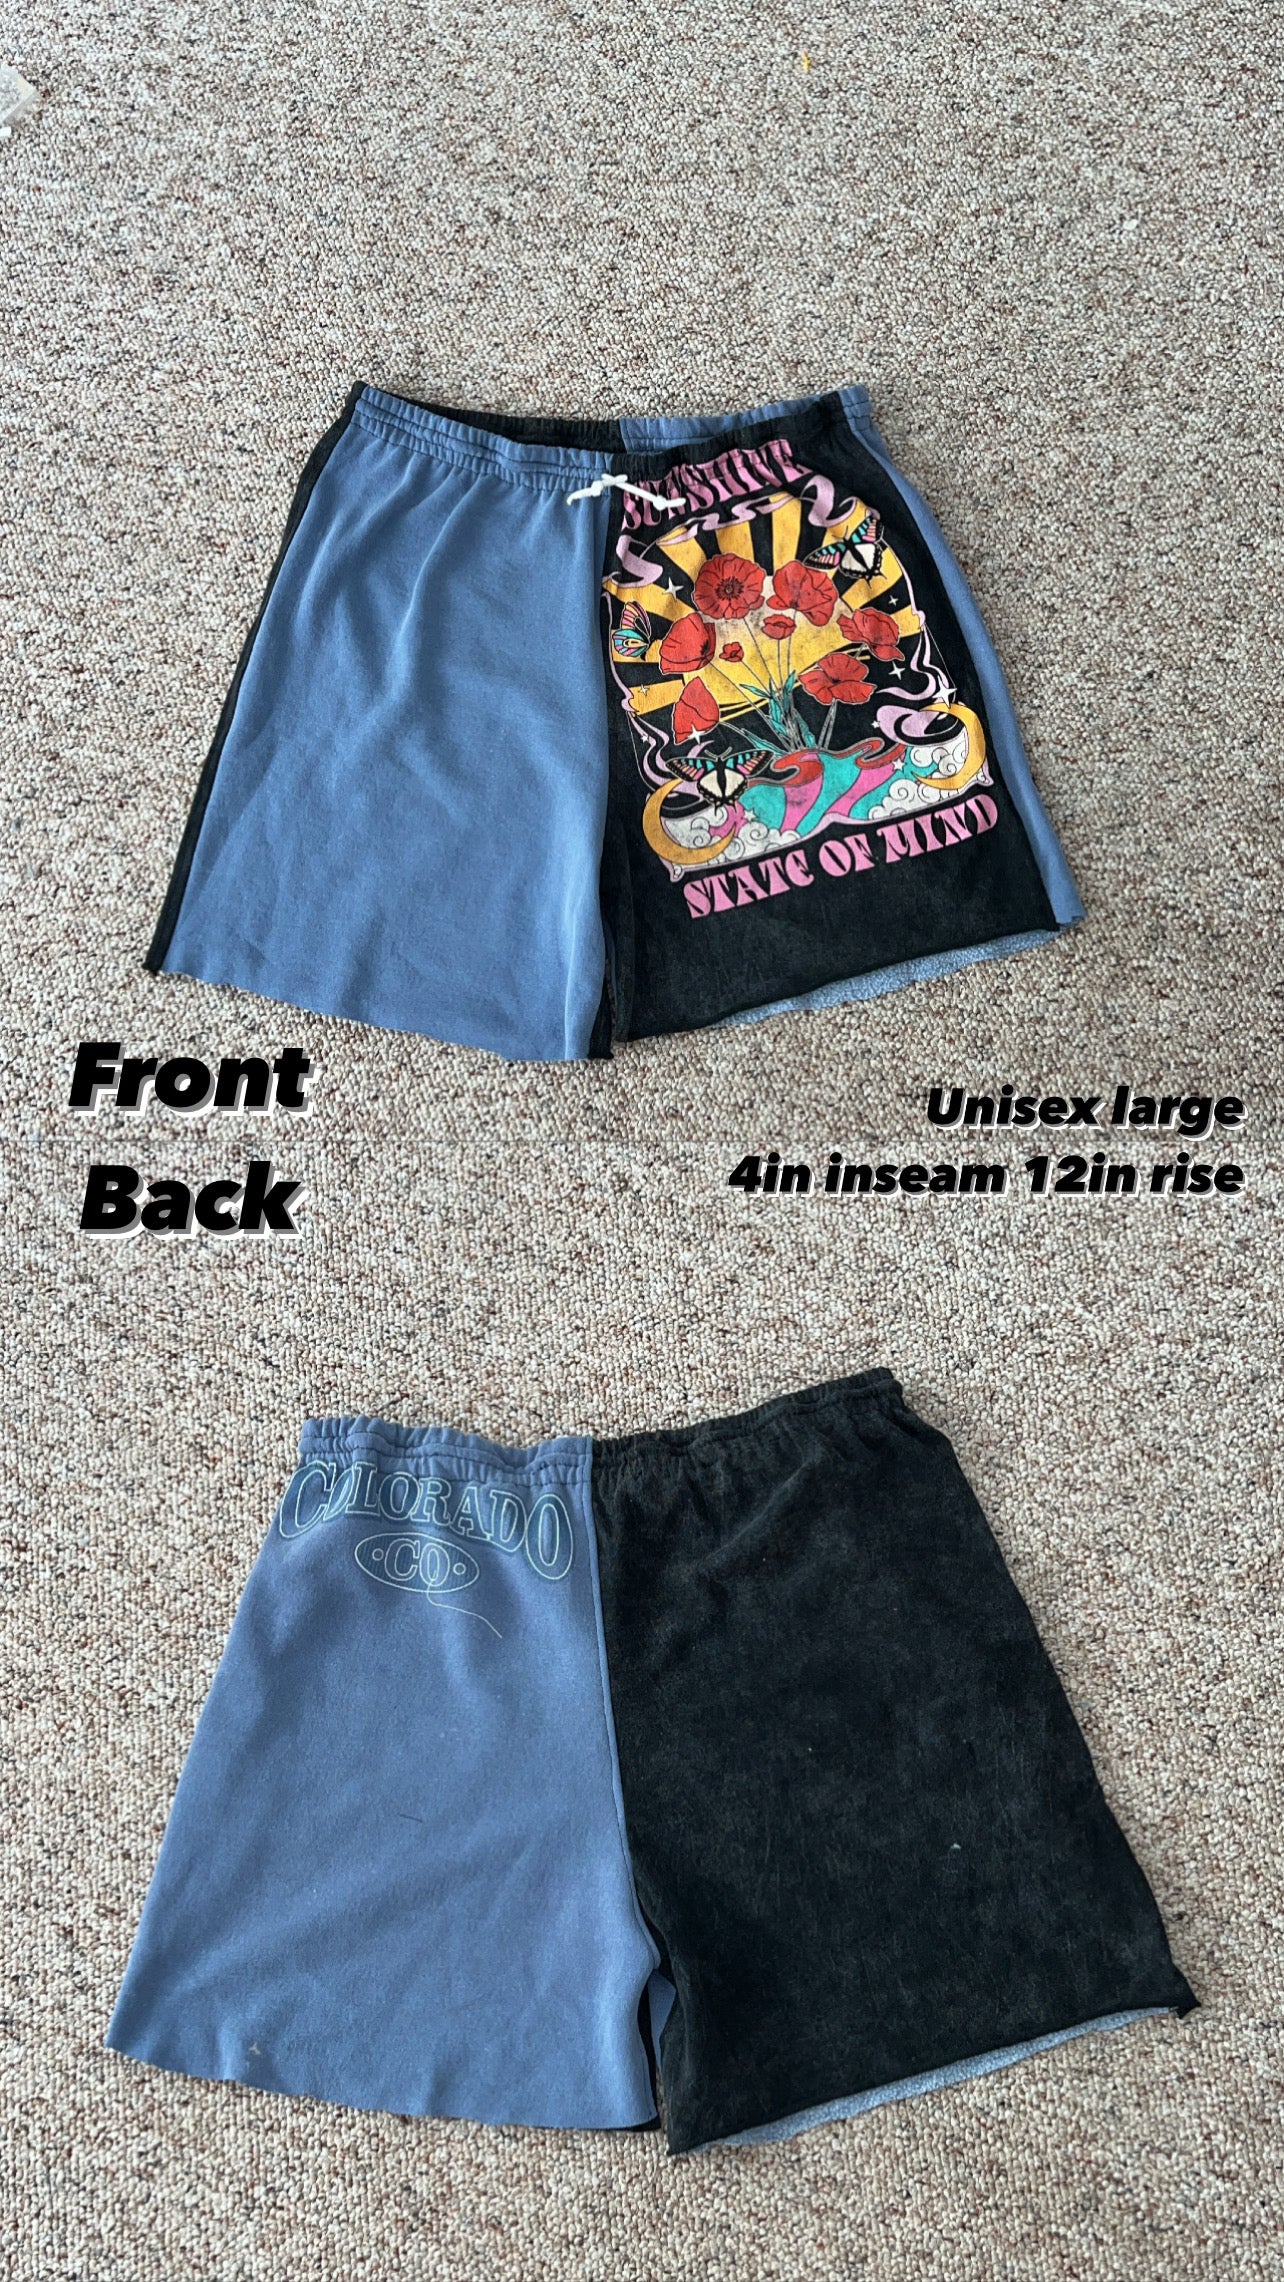 State of mind shorts